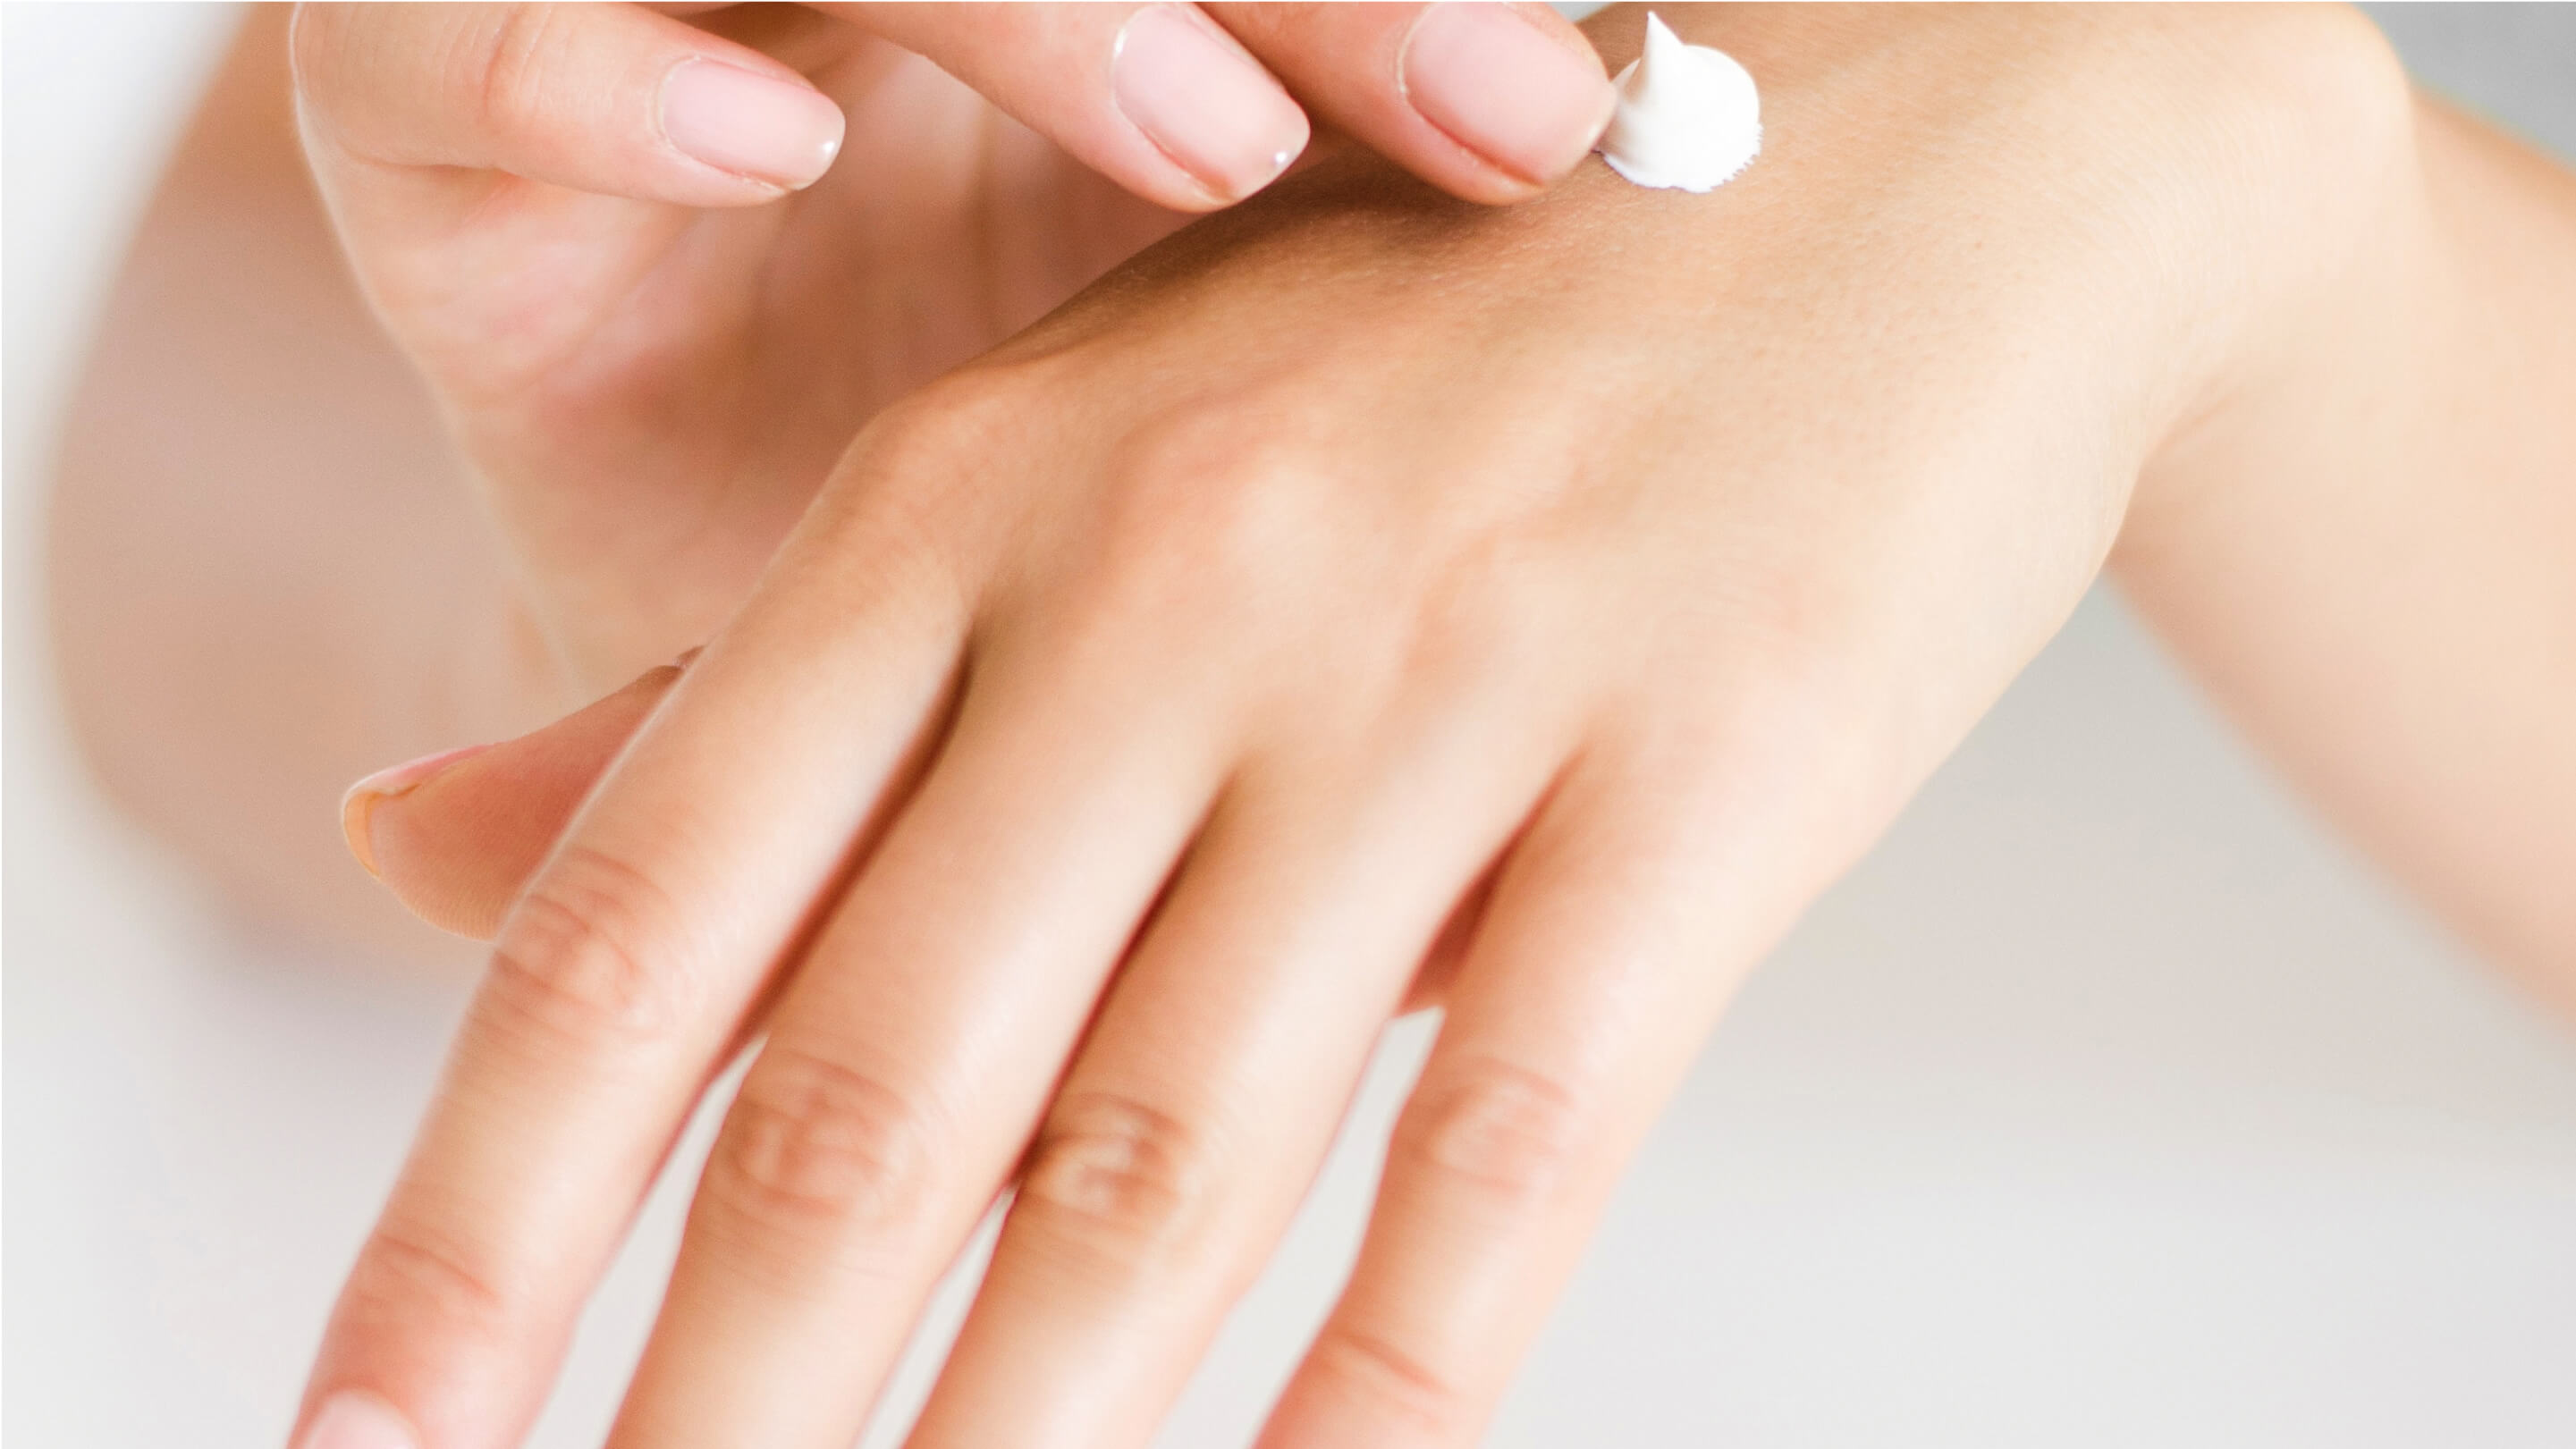 Why and how often should you use hand cream?